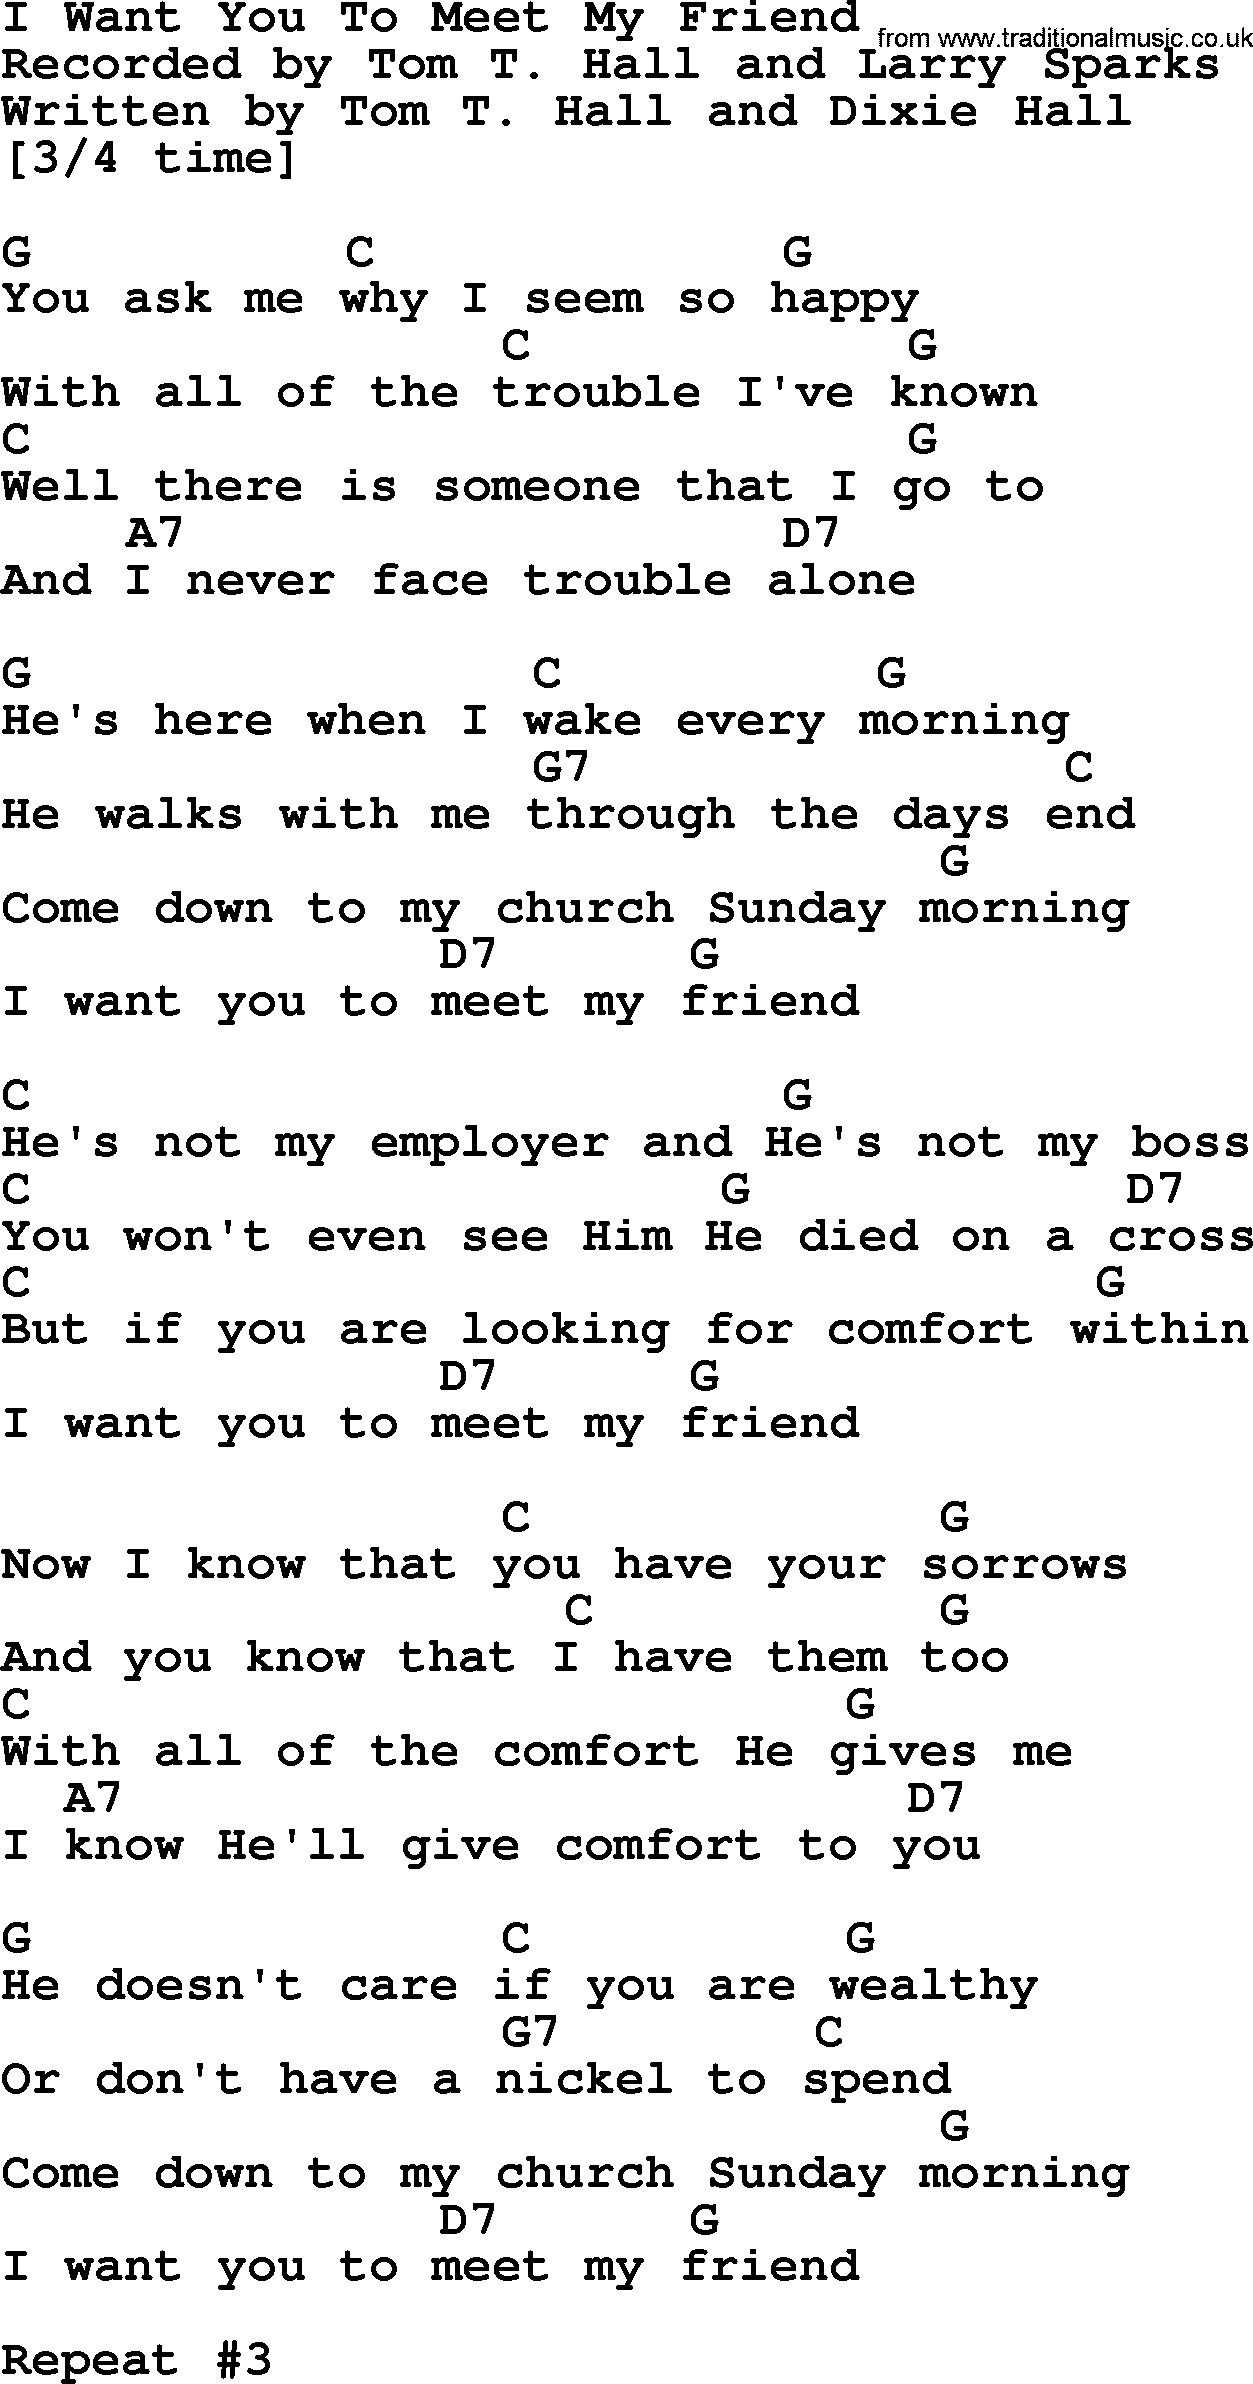 Bluegrass song: I Want You To Meet My Friend, lyrics and chords